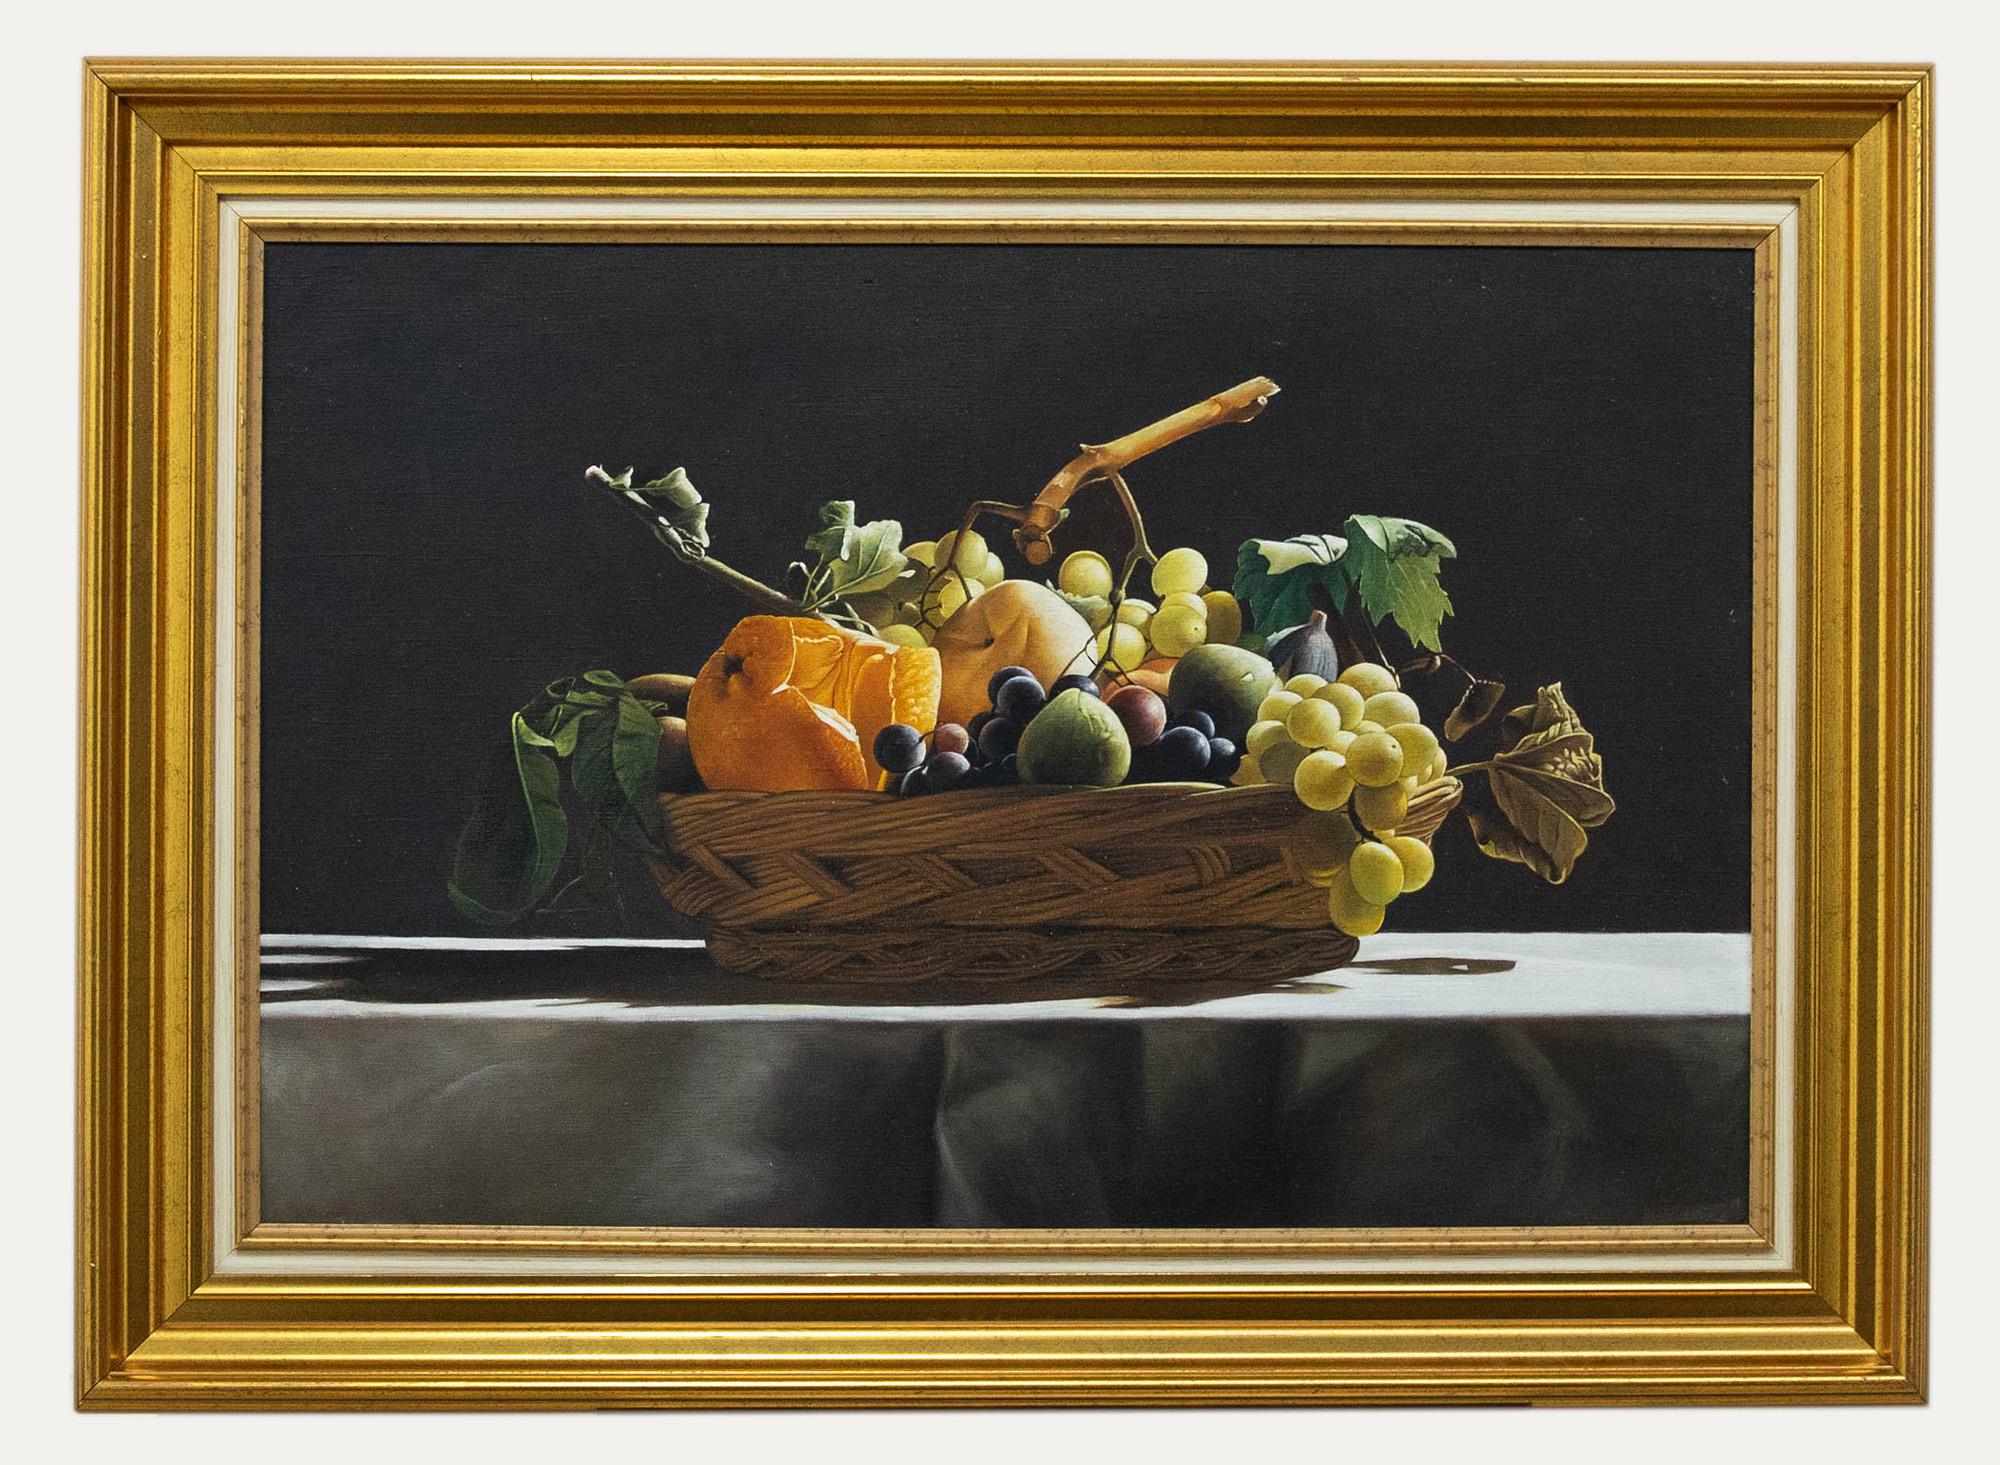 Unknown Still-Life Painting - T. Mason - Framed 20th Century Oil, The Fruit Basket